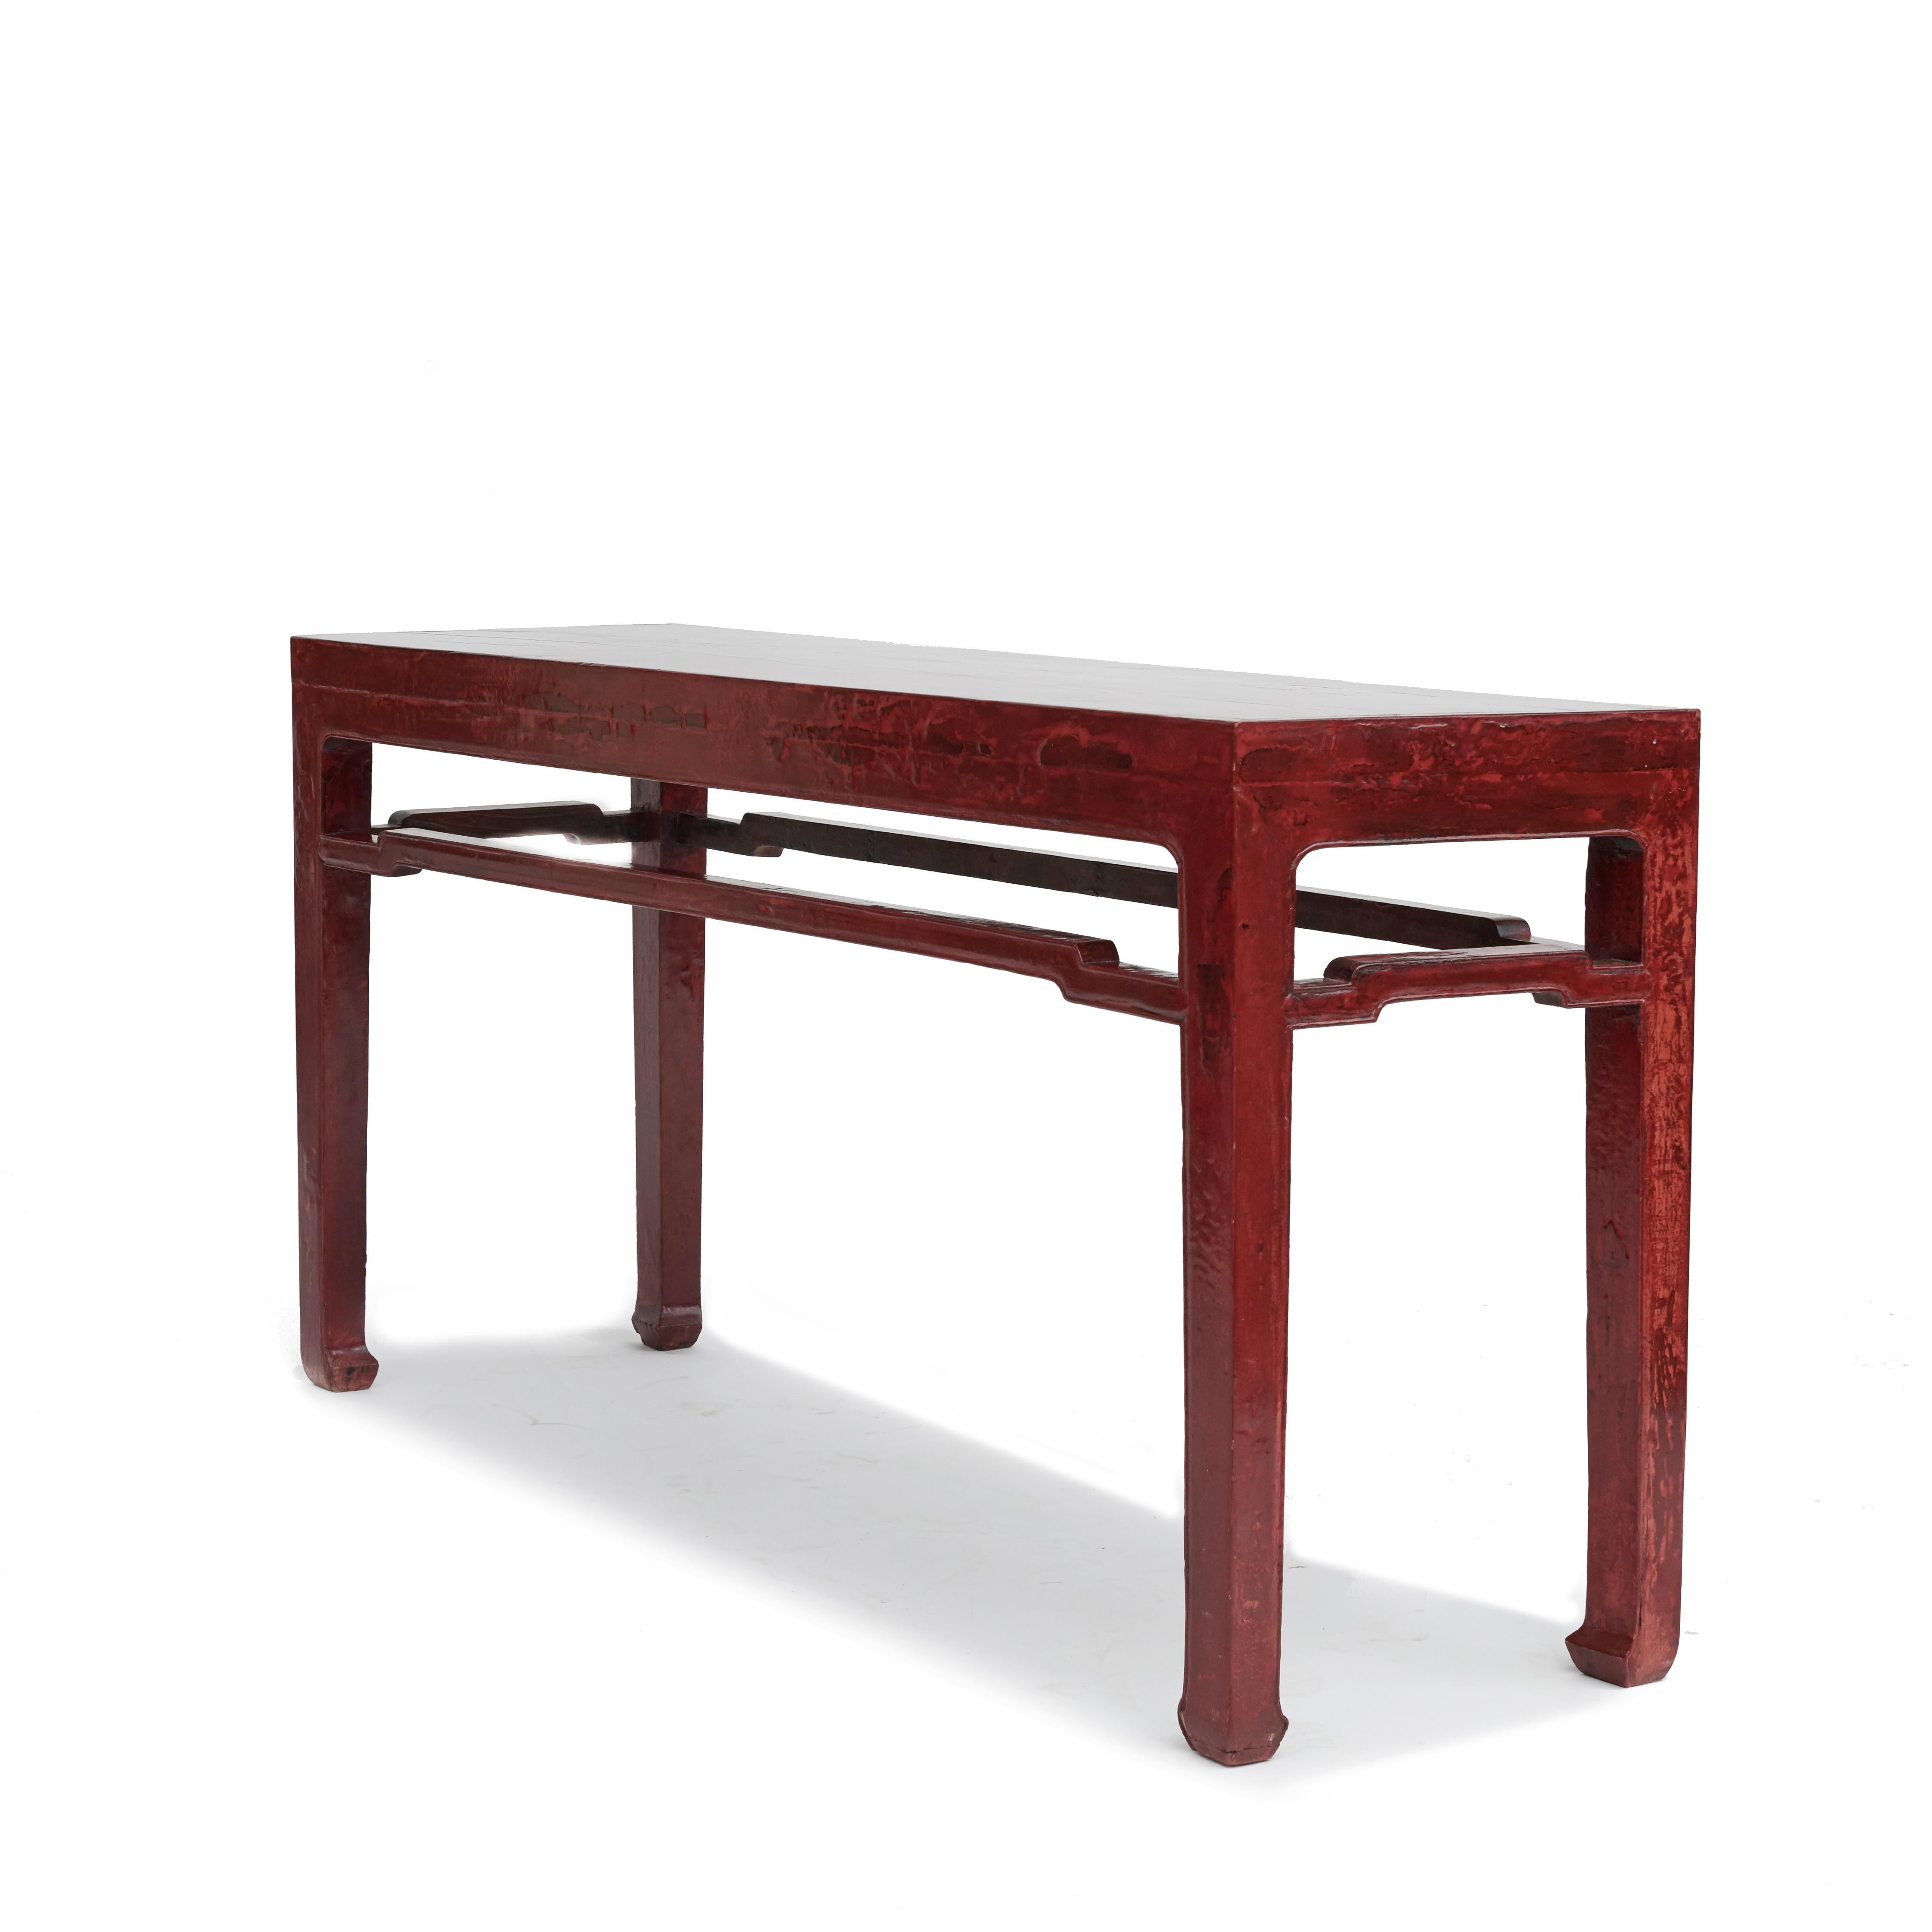 A freestanding ming style console table.
The table features humpback stretchers, horse hoof feet and original red lacquer with natural age-related patina.

Presumably made of ironwood, as it is very heavy. However, this is difficult to determine